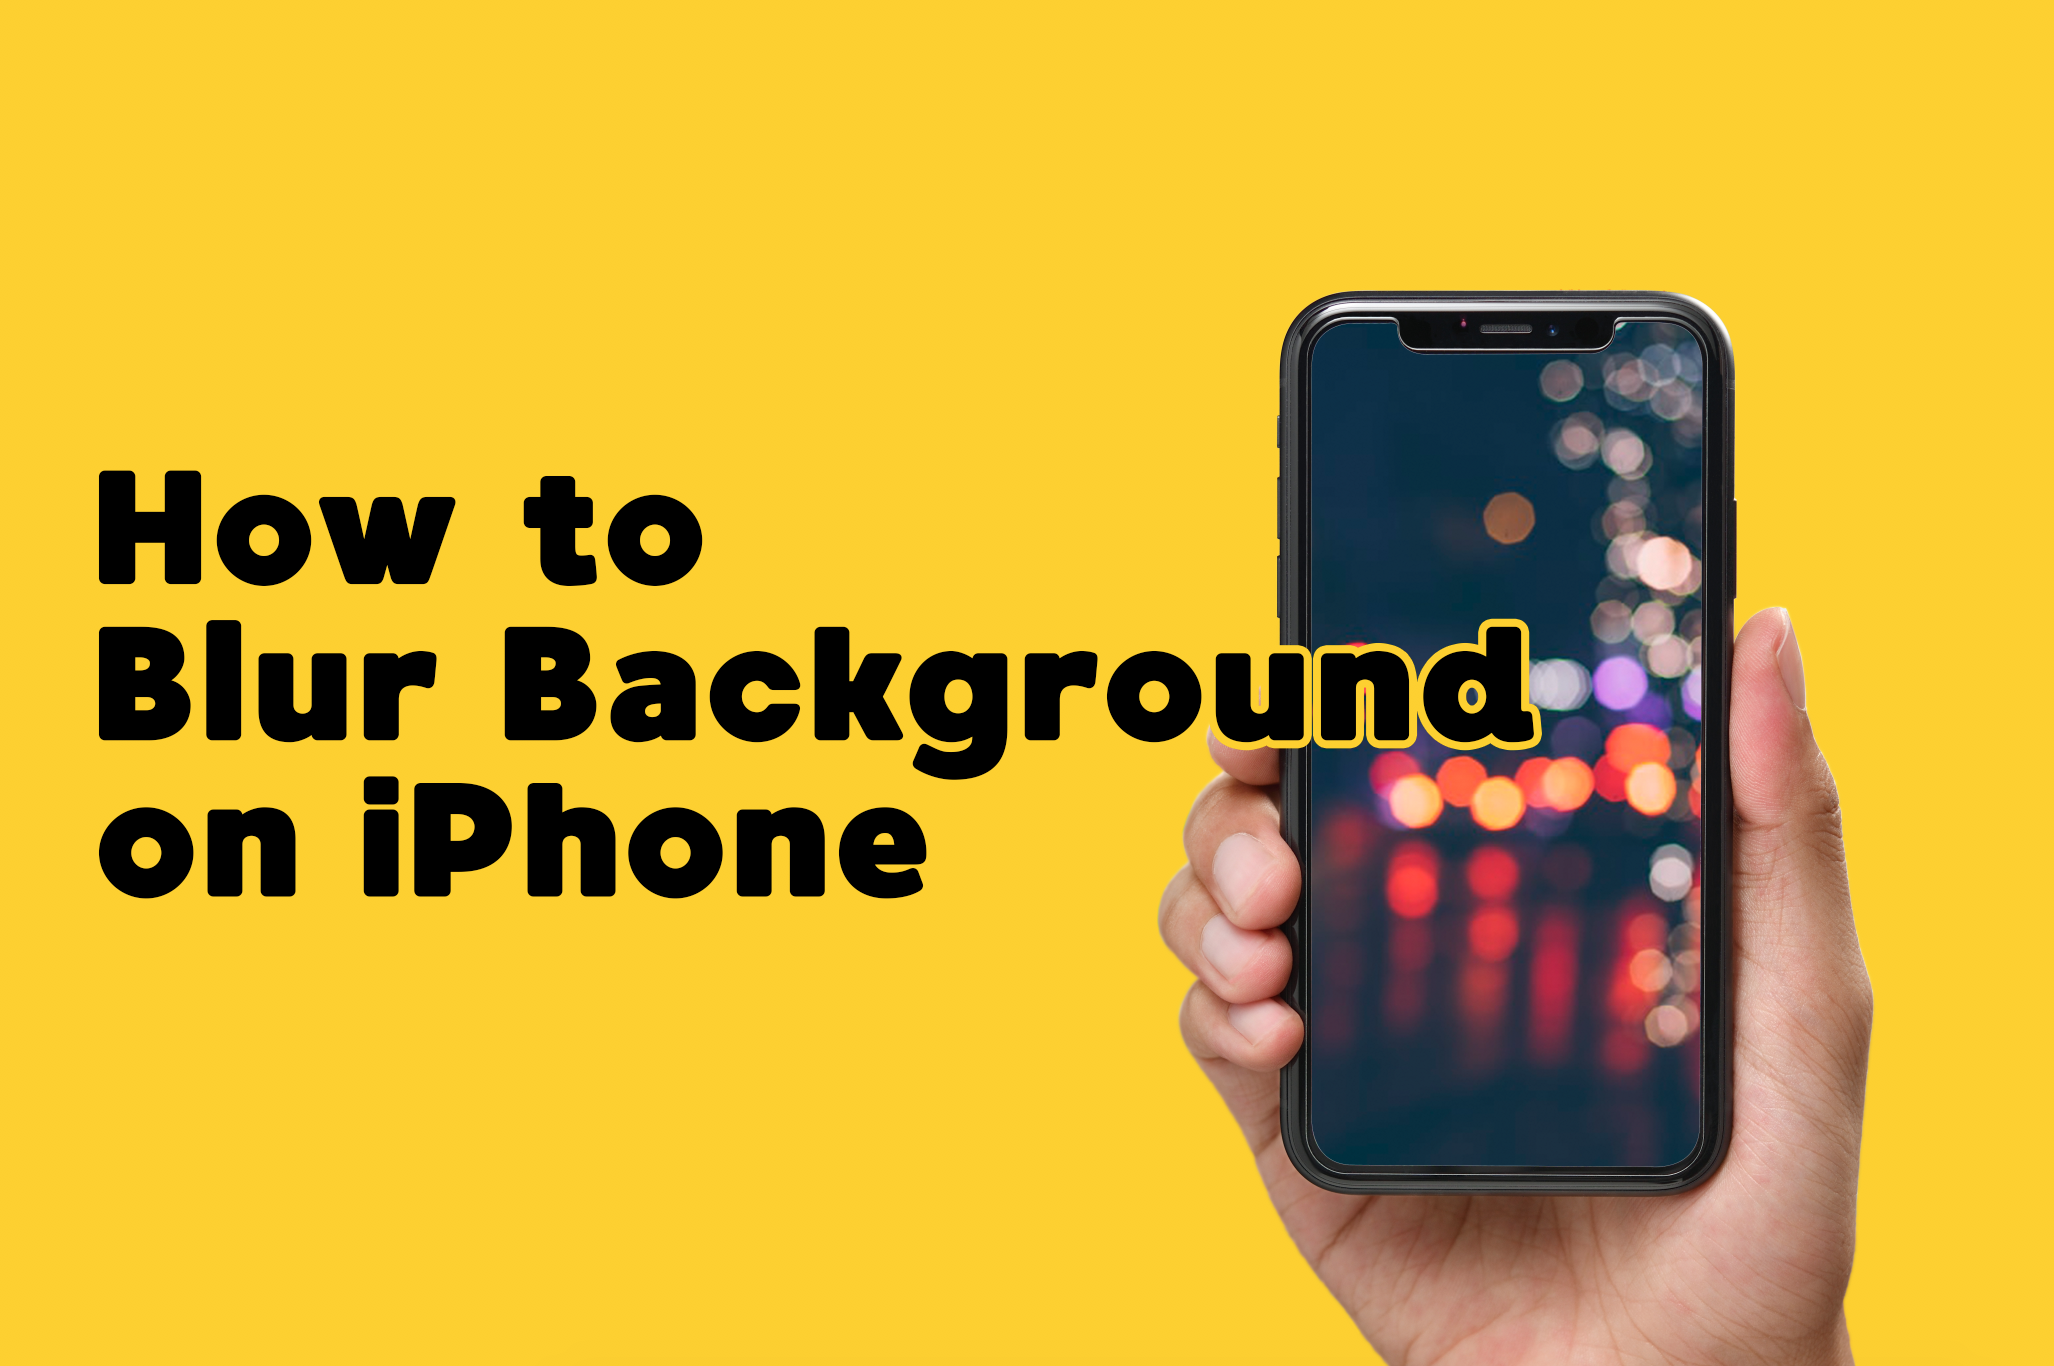 How to Blur Background on iPhone